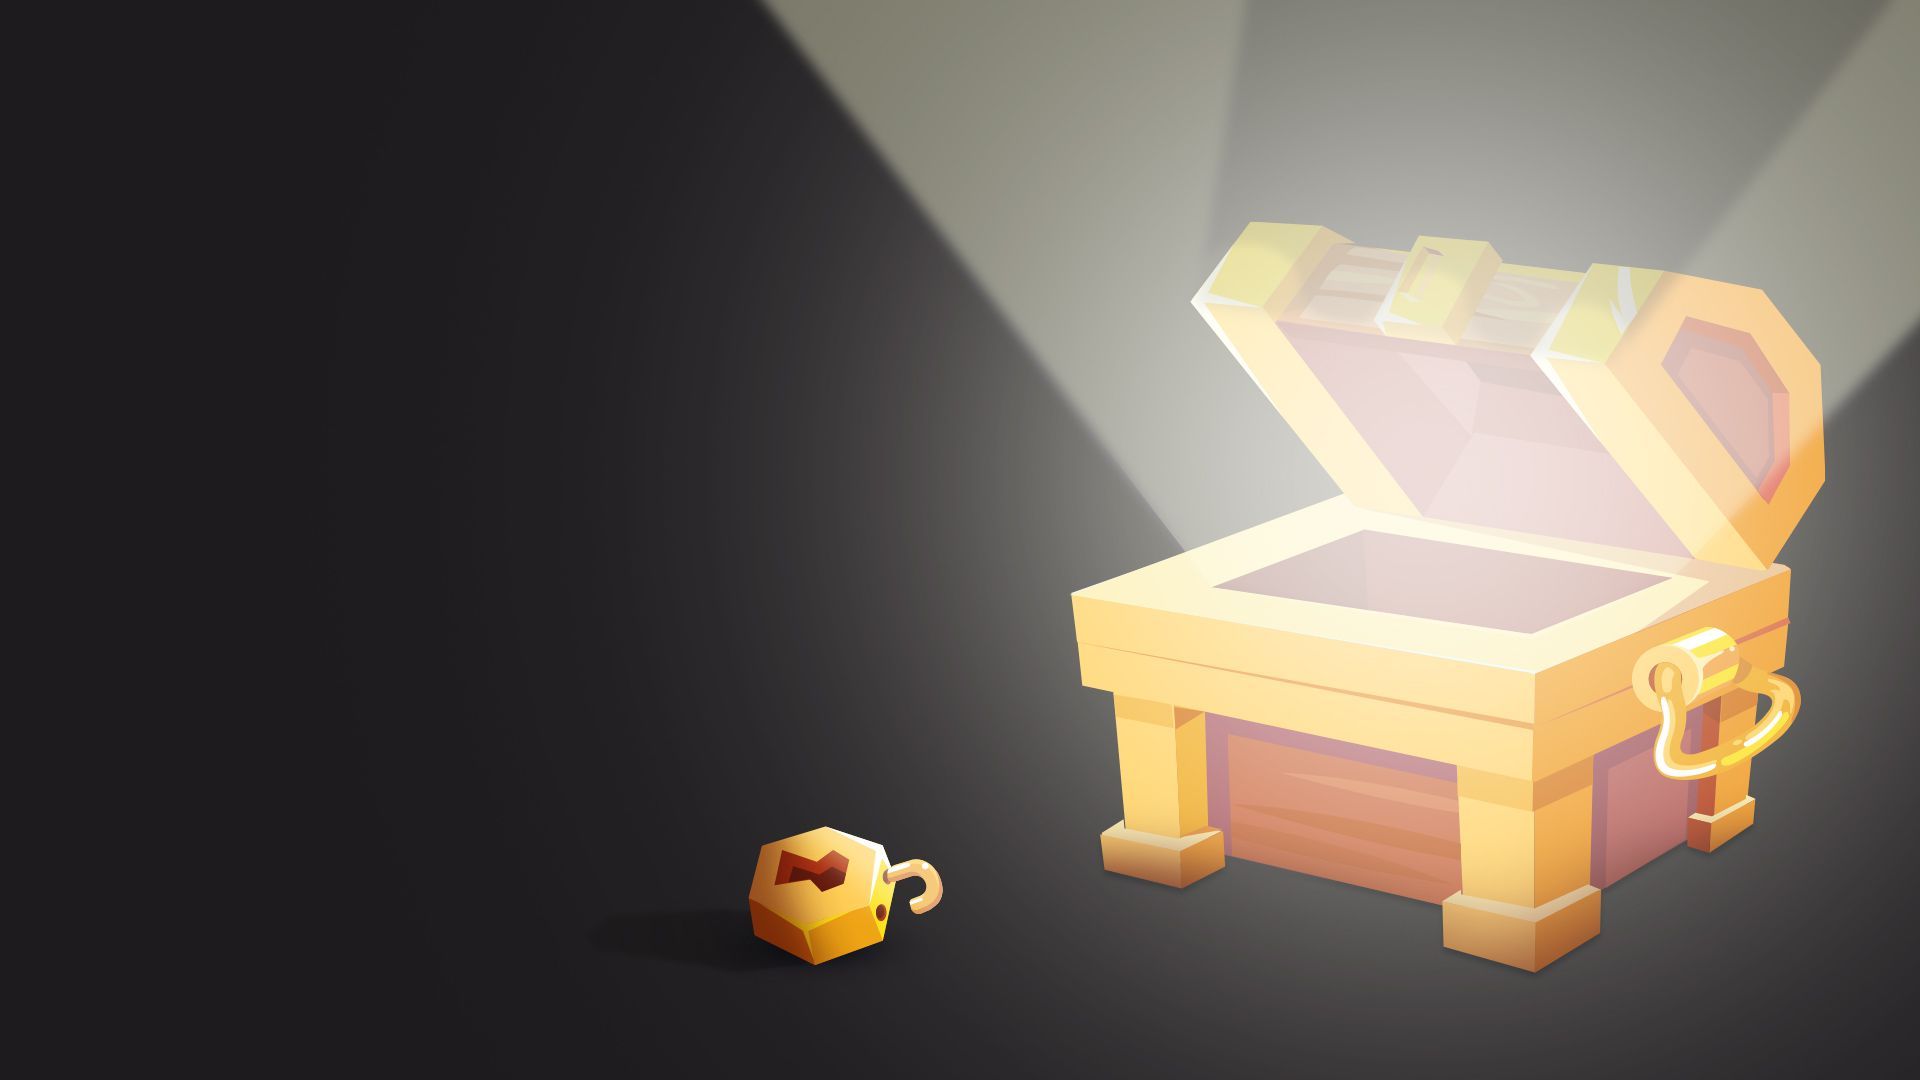 Illustration of a treasure chest wide open pouring out light and glowing.